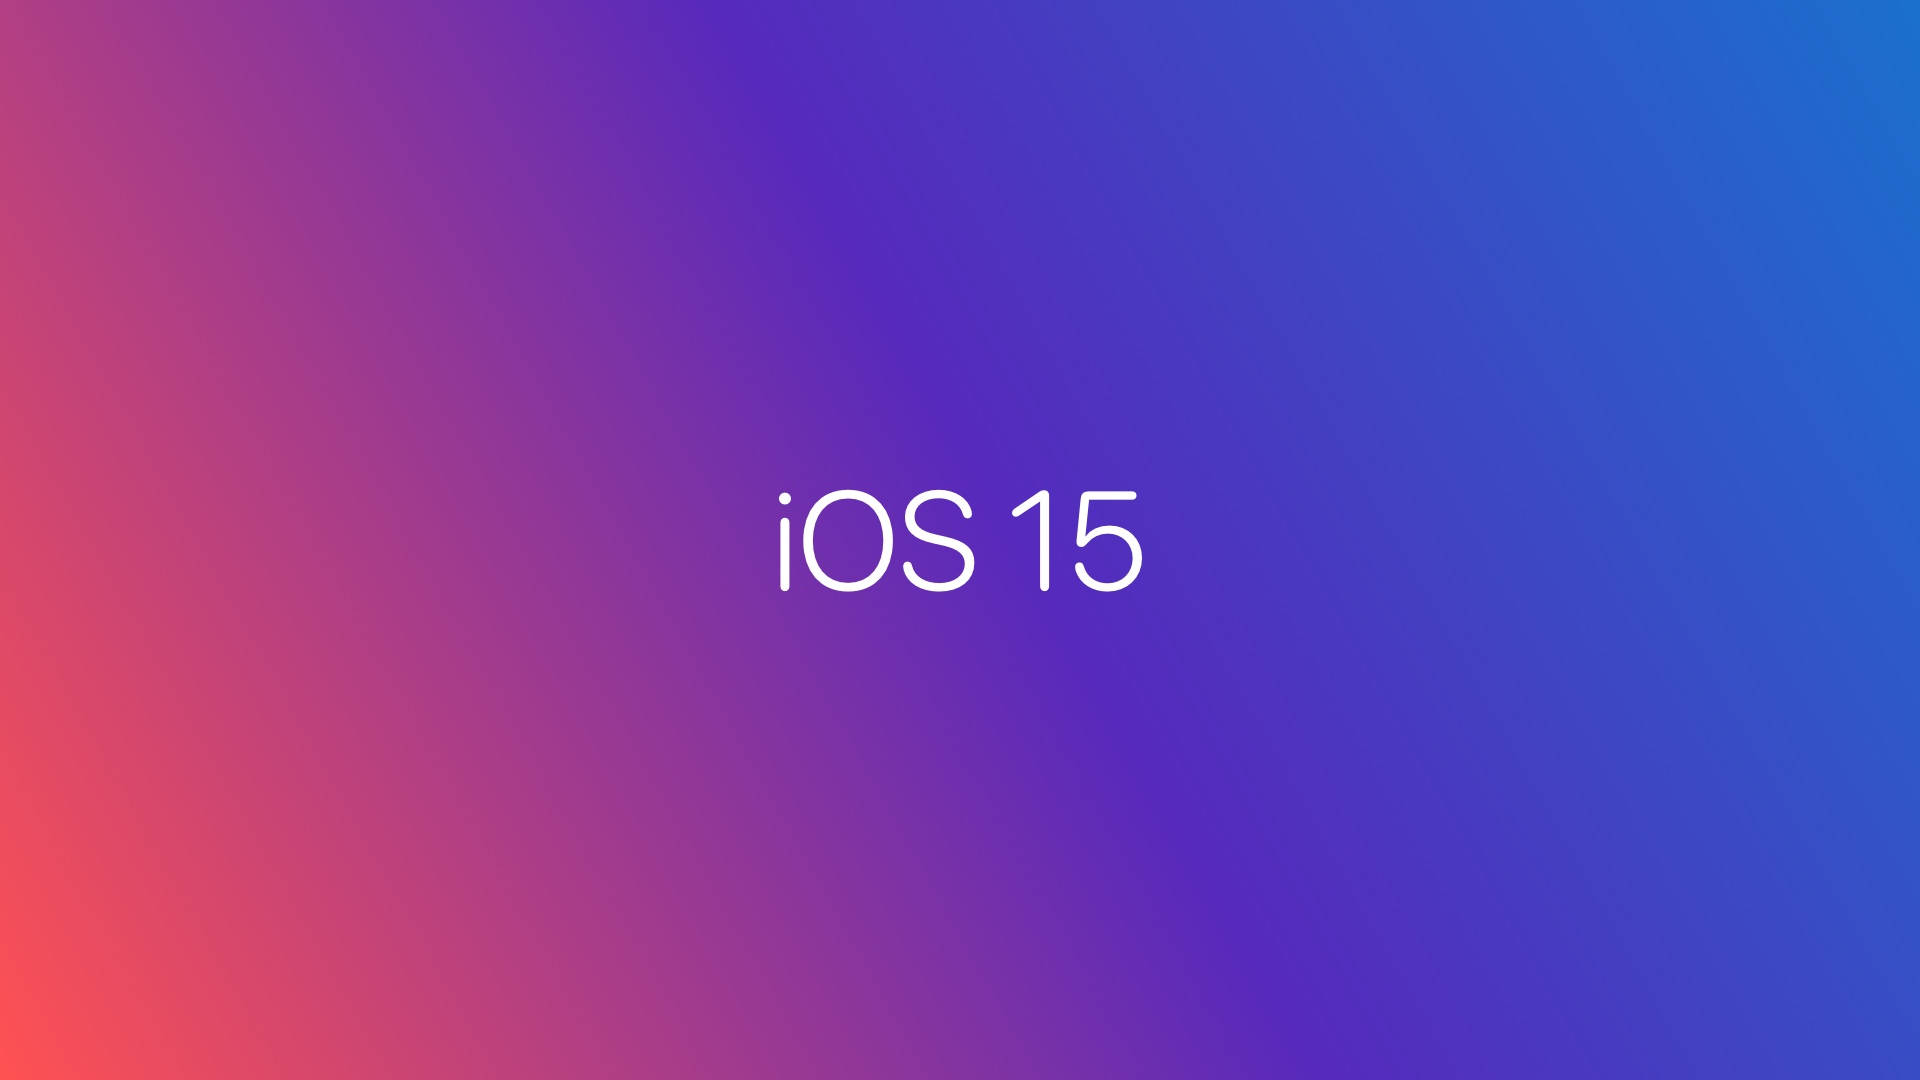 Ios 15 Wallpaper Images